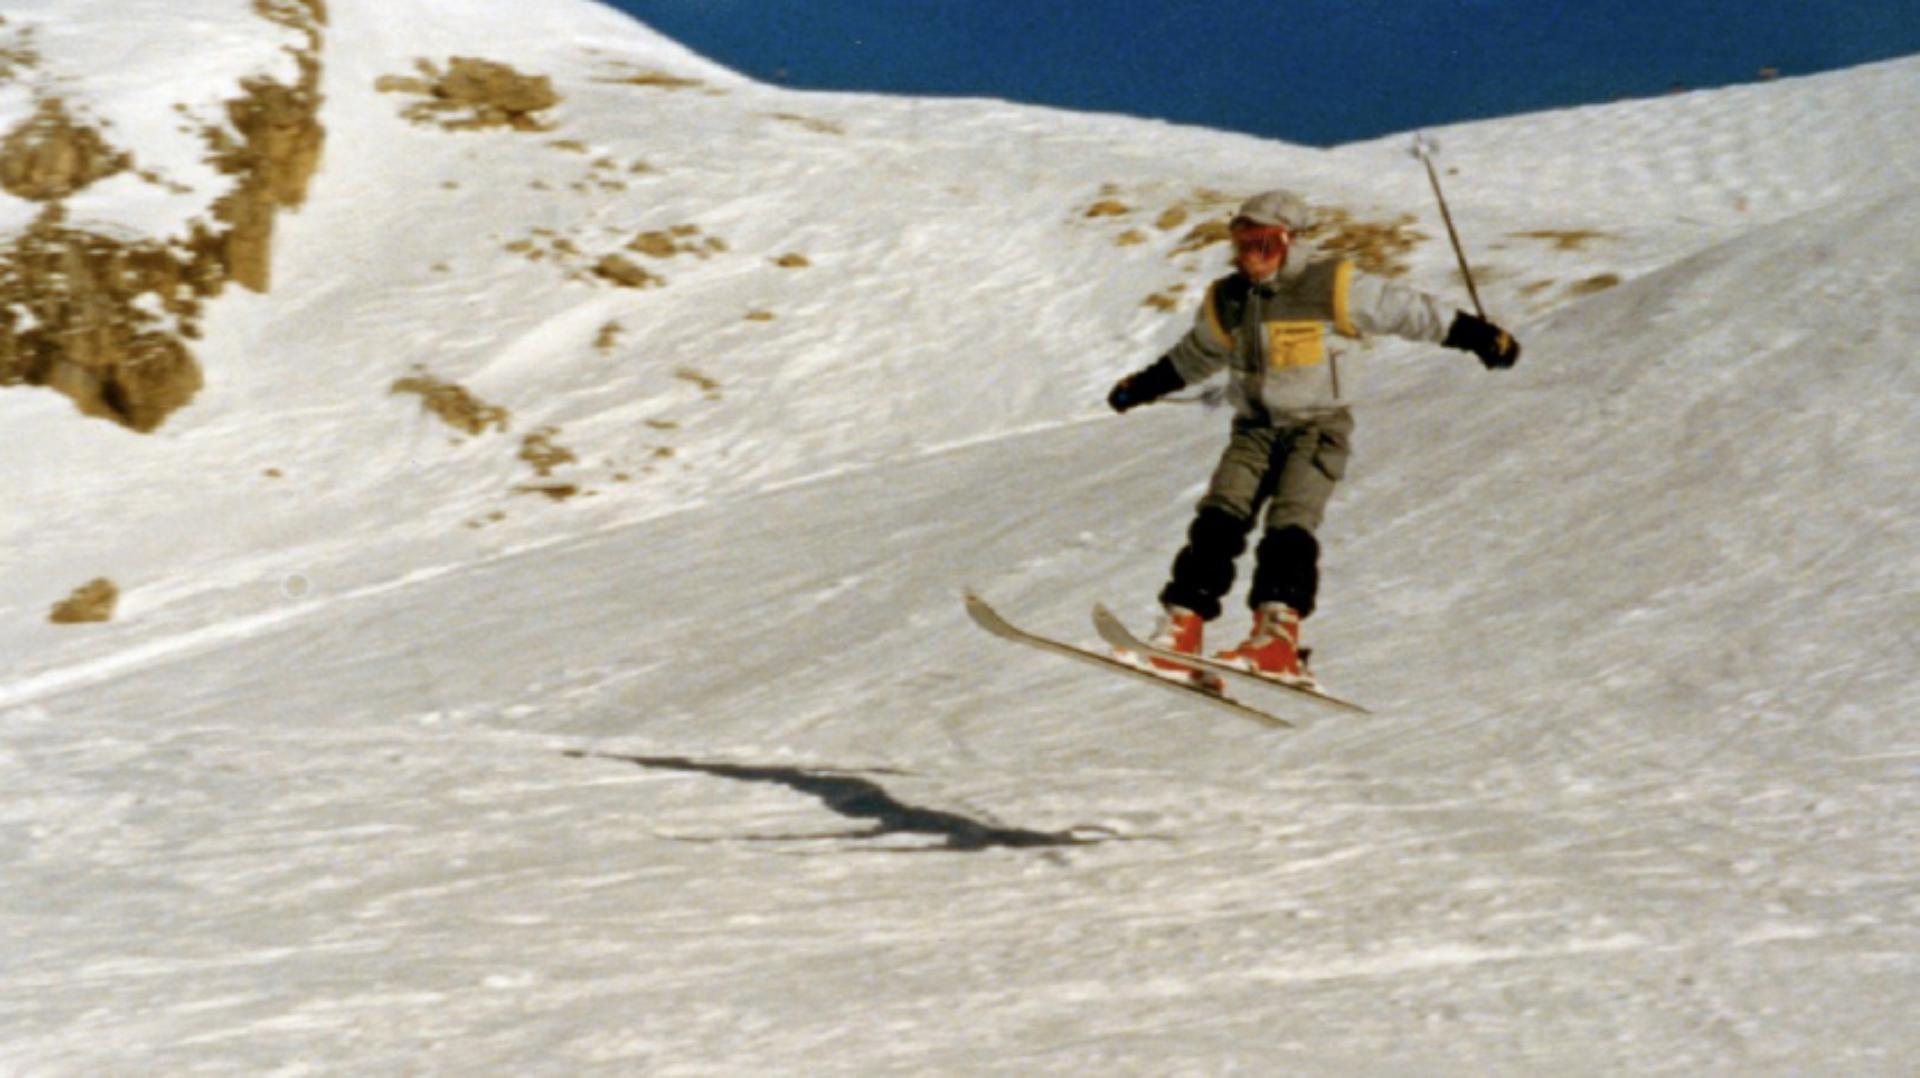 A young Dyson boy on a ski slope, making a jump, with ski poles in the air